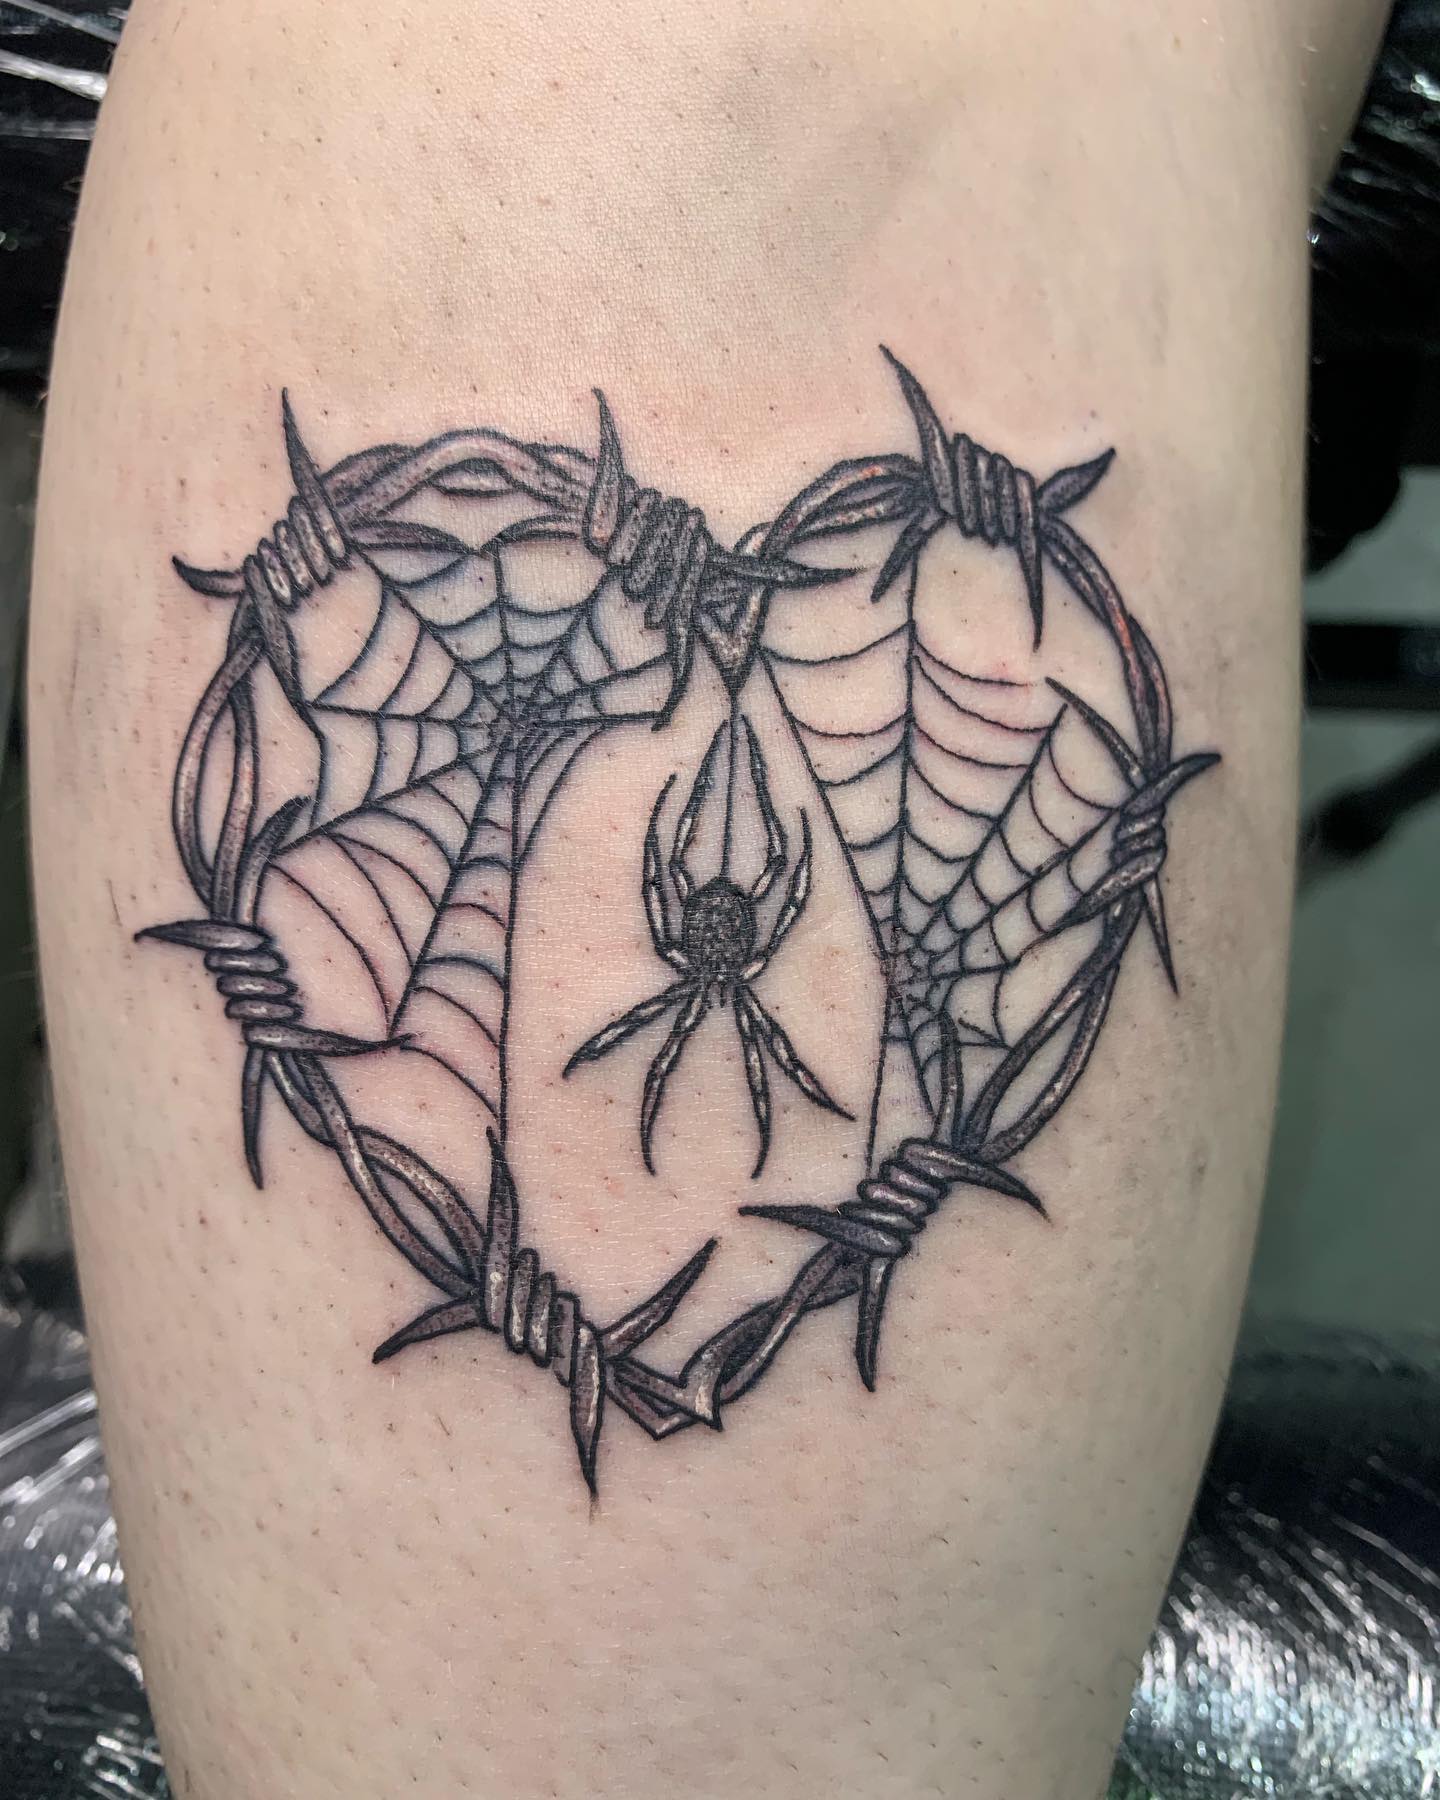 Barbed wire heart is worth a try if you want to get some fresh ink to look amazing. As a nice detail, the spider inside the heart looks like he has made a net to give it a heart shape. The barbed wire and the net are ready to save you from any harm.